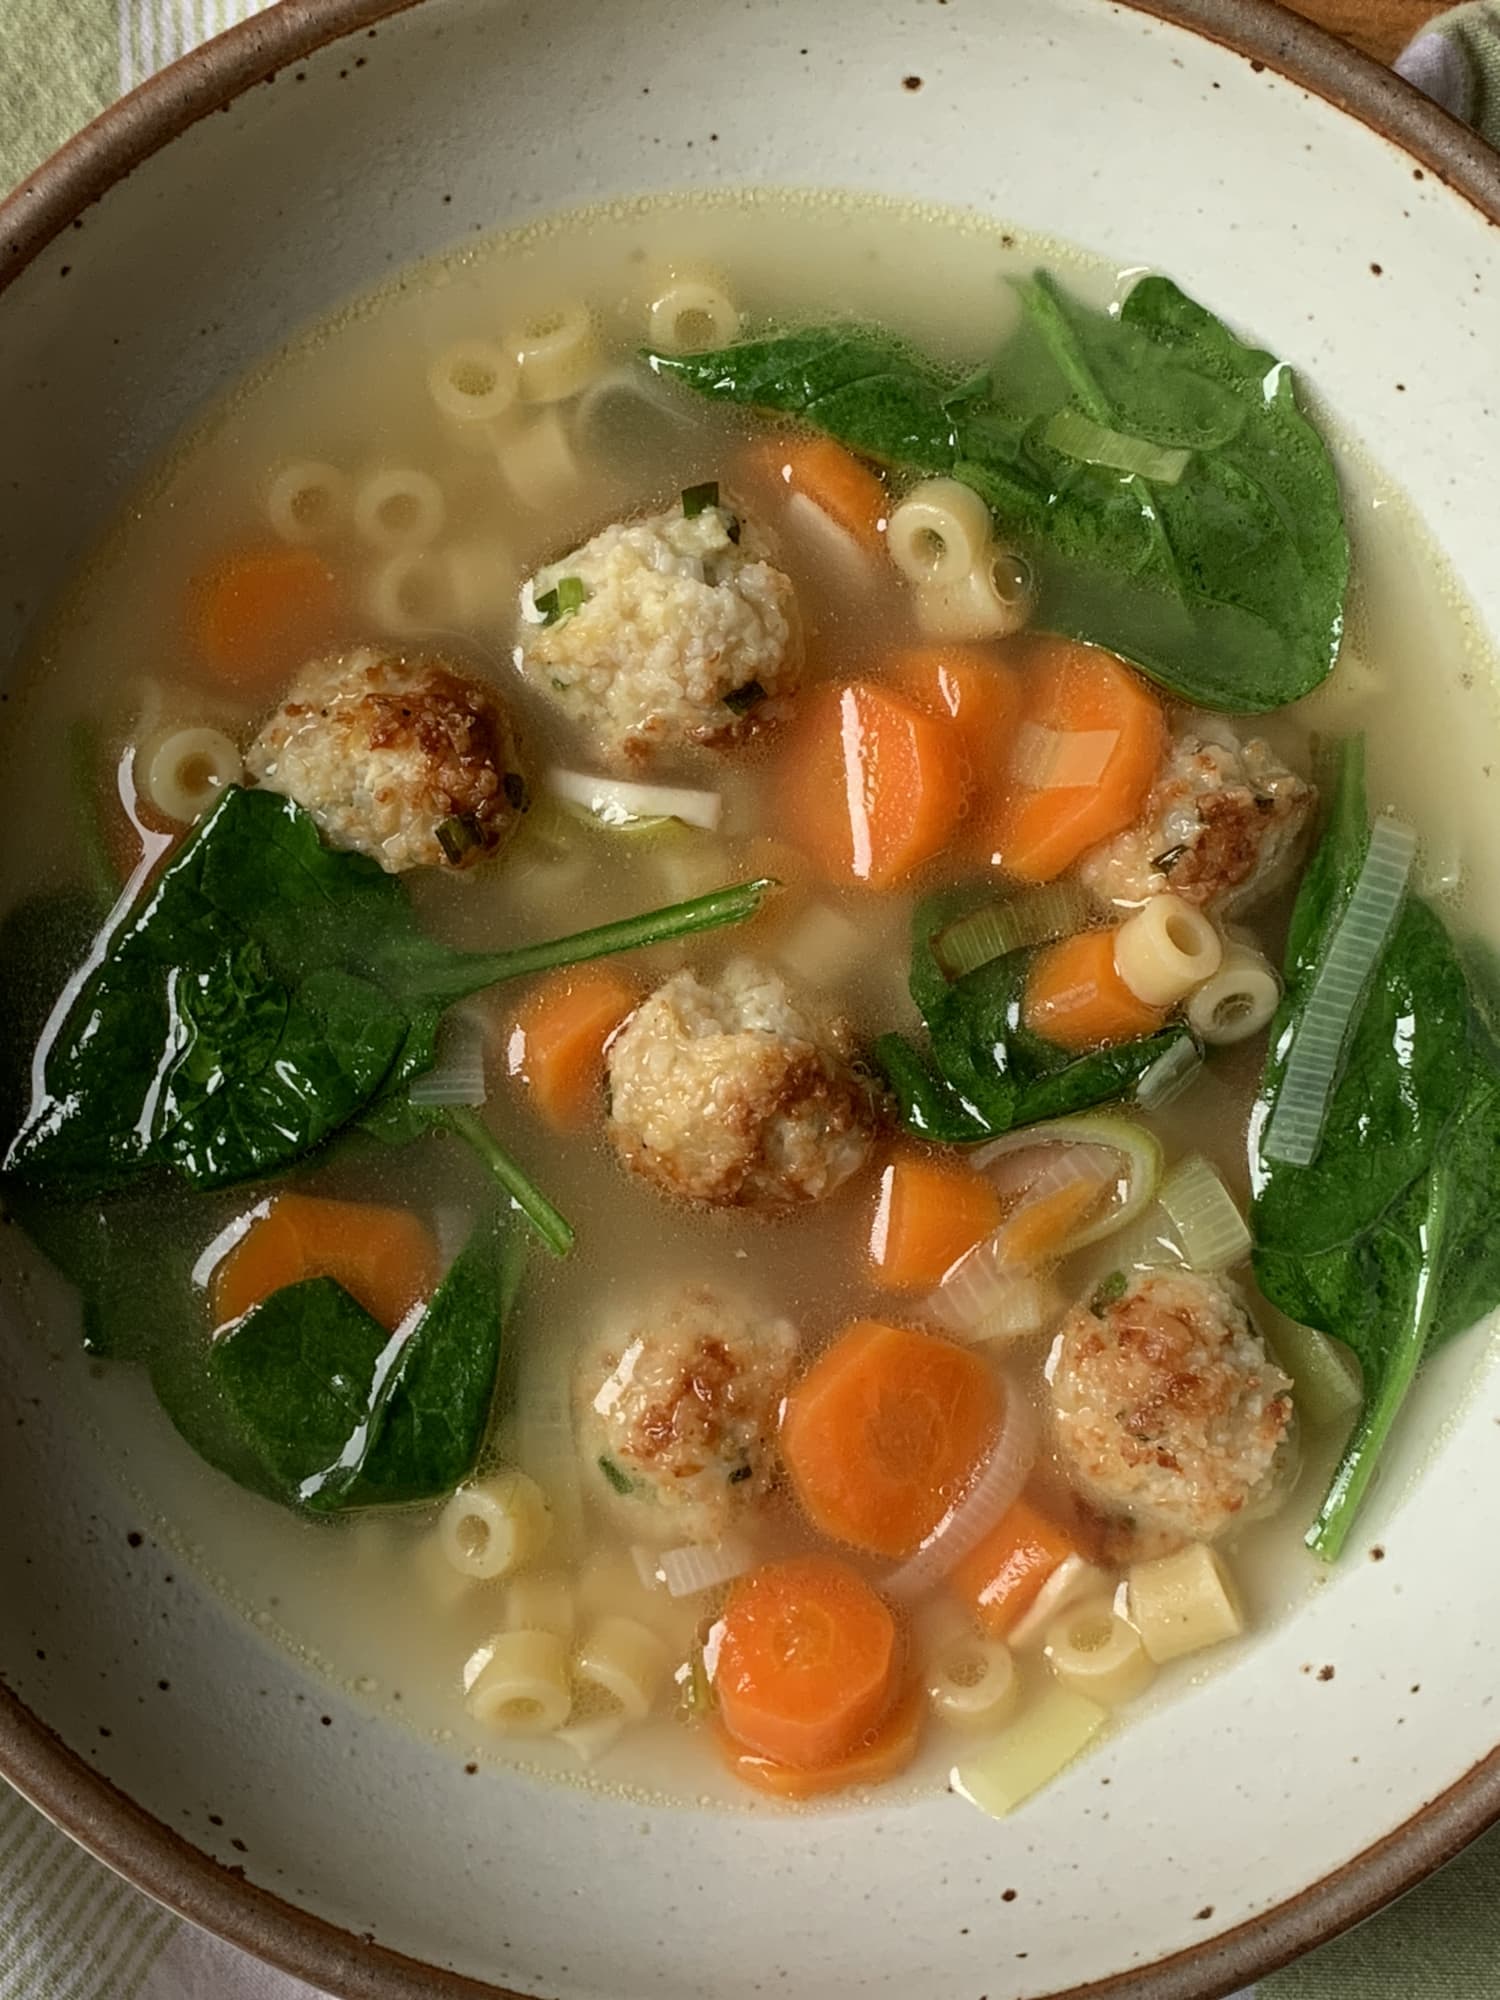 I Love This Soup So Much, I Make It Practically Every Week During the Spring